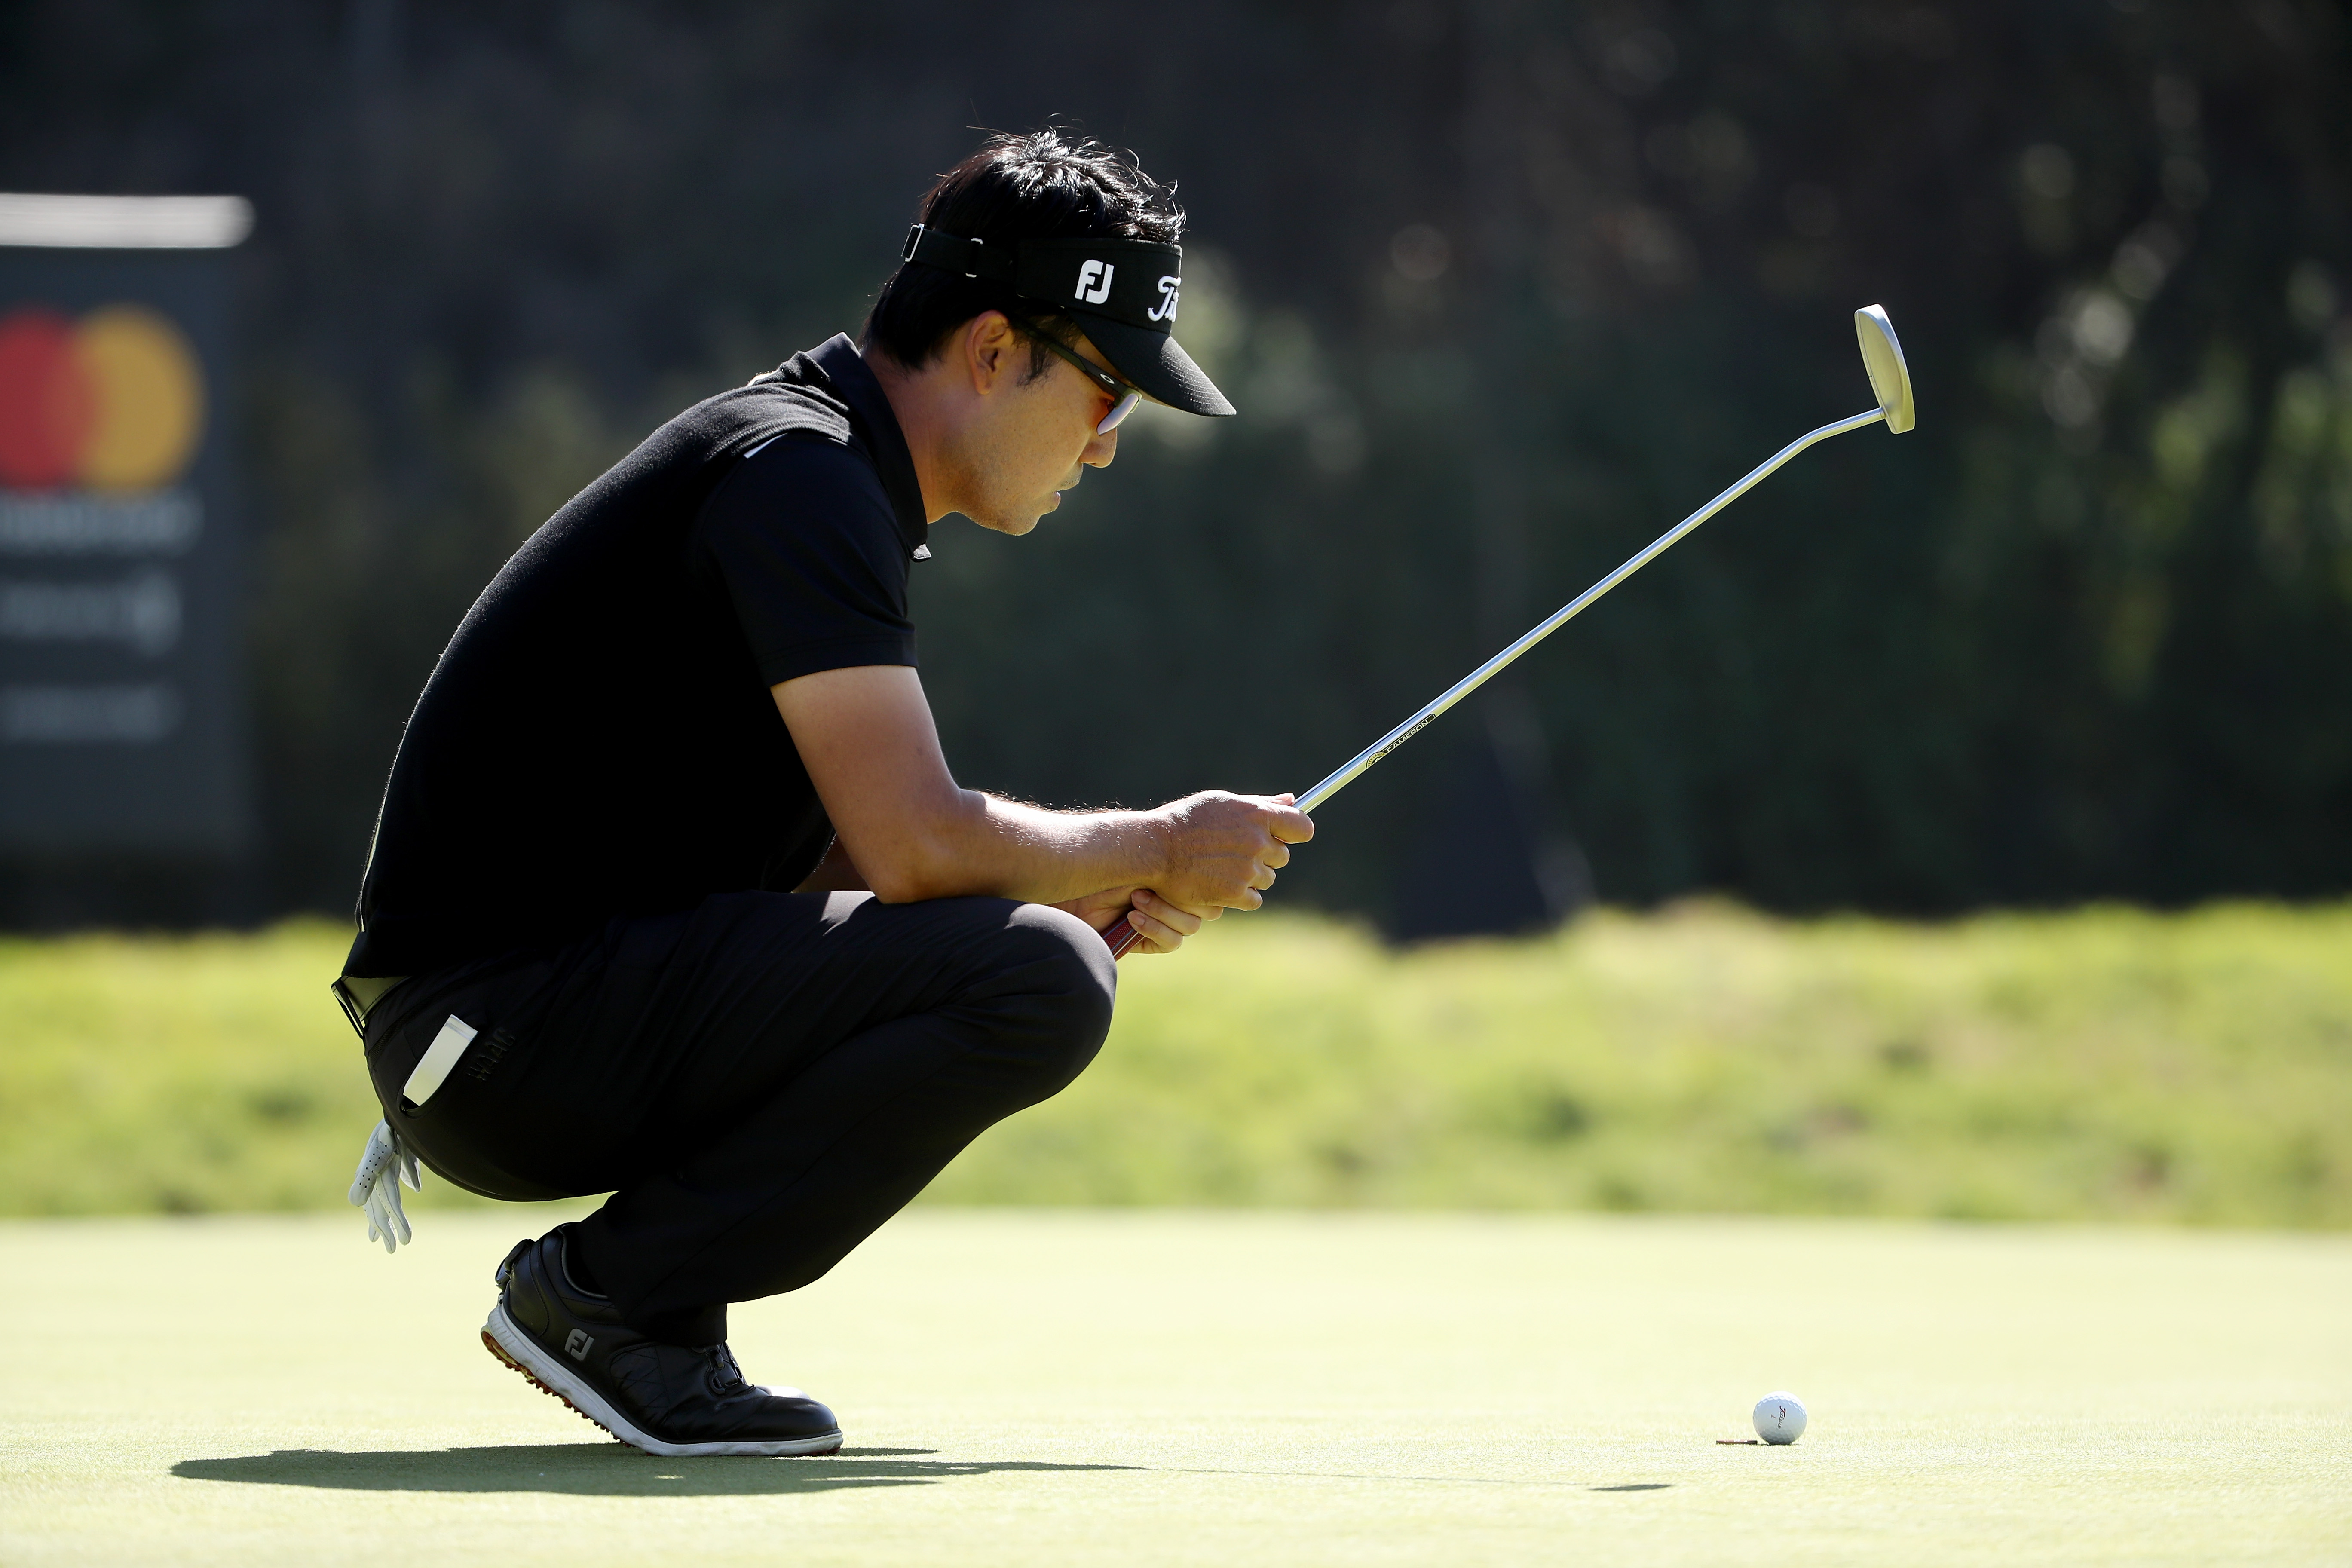 Kevin Pietersen shows Kevin Na how to go about a tap-in! 